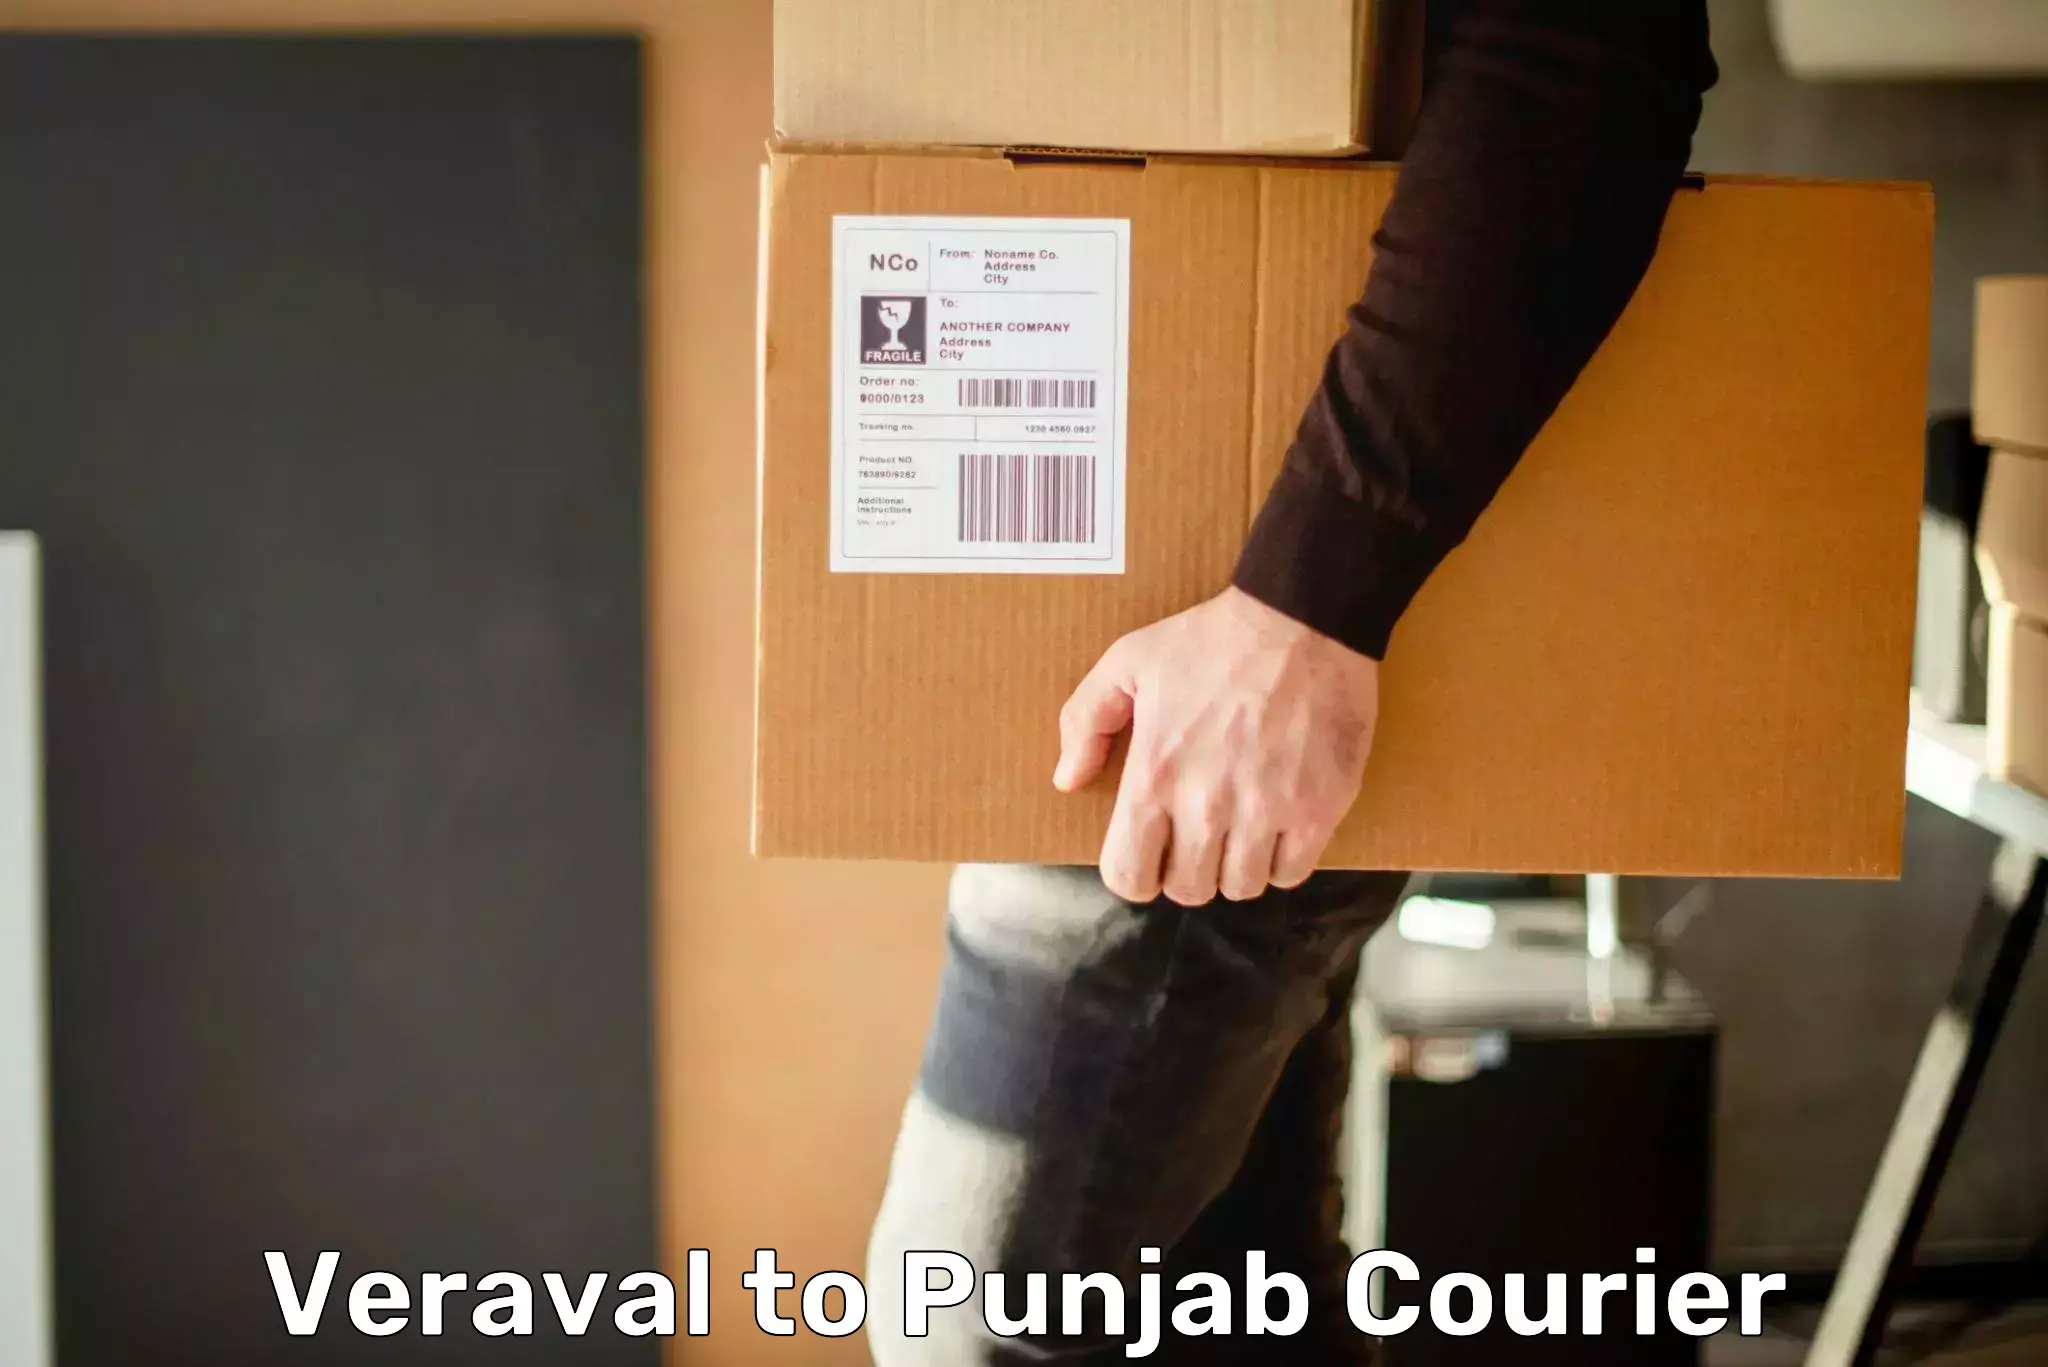 Comprehensive shipping network Veraval to Punjab